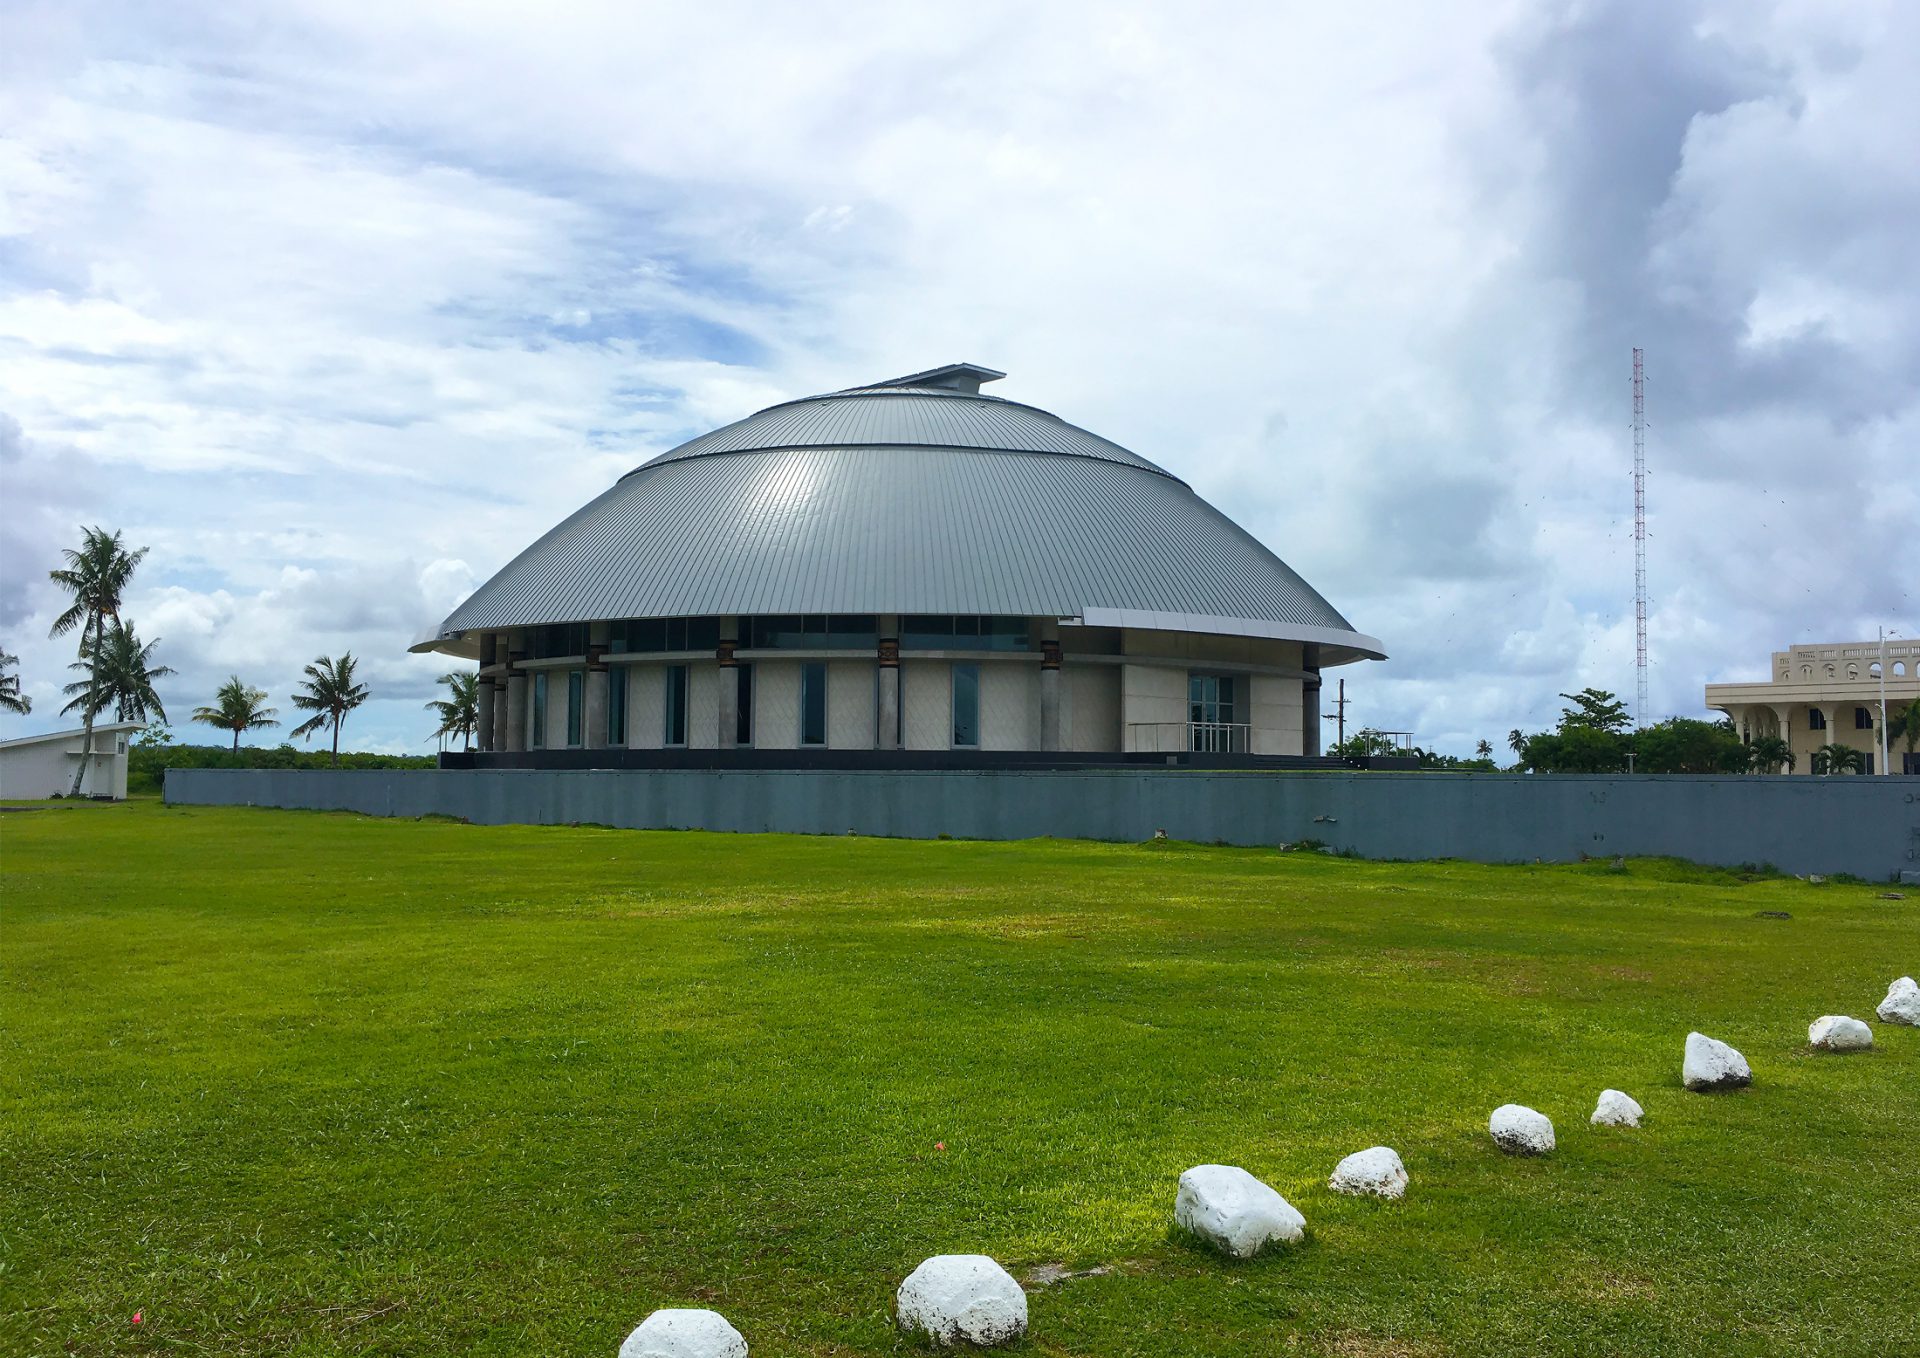 Photo of an office in Samoa with a rounded roof.